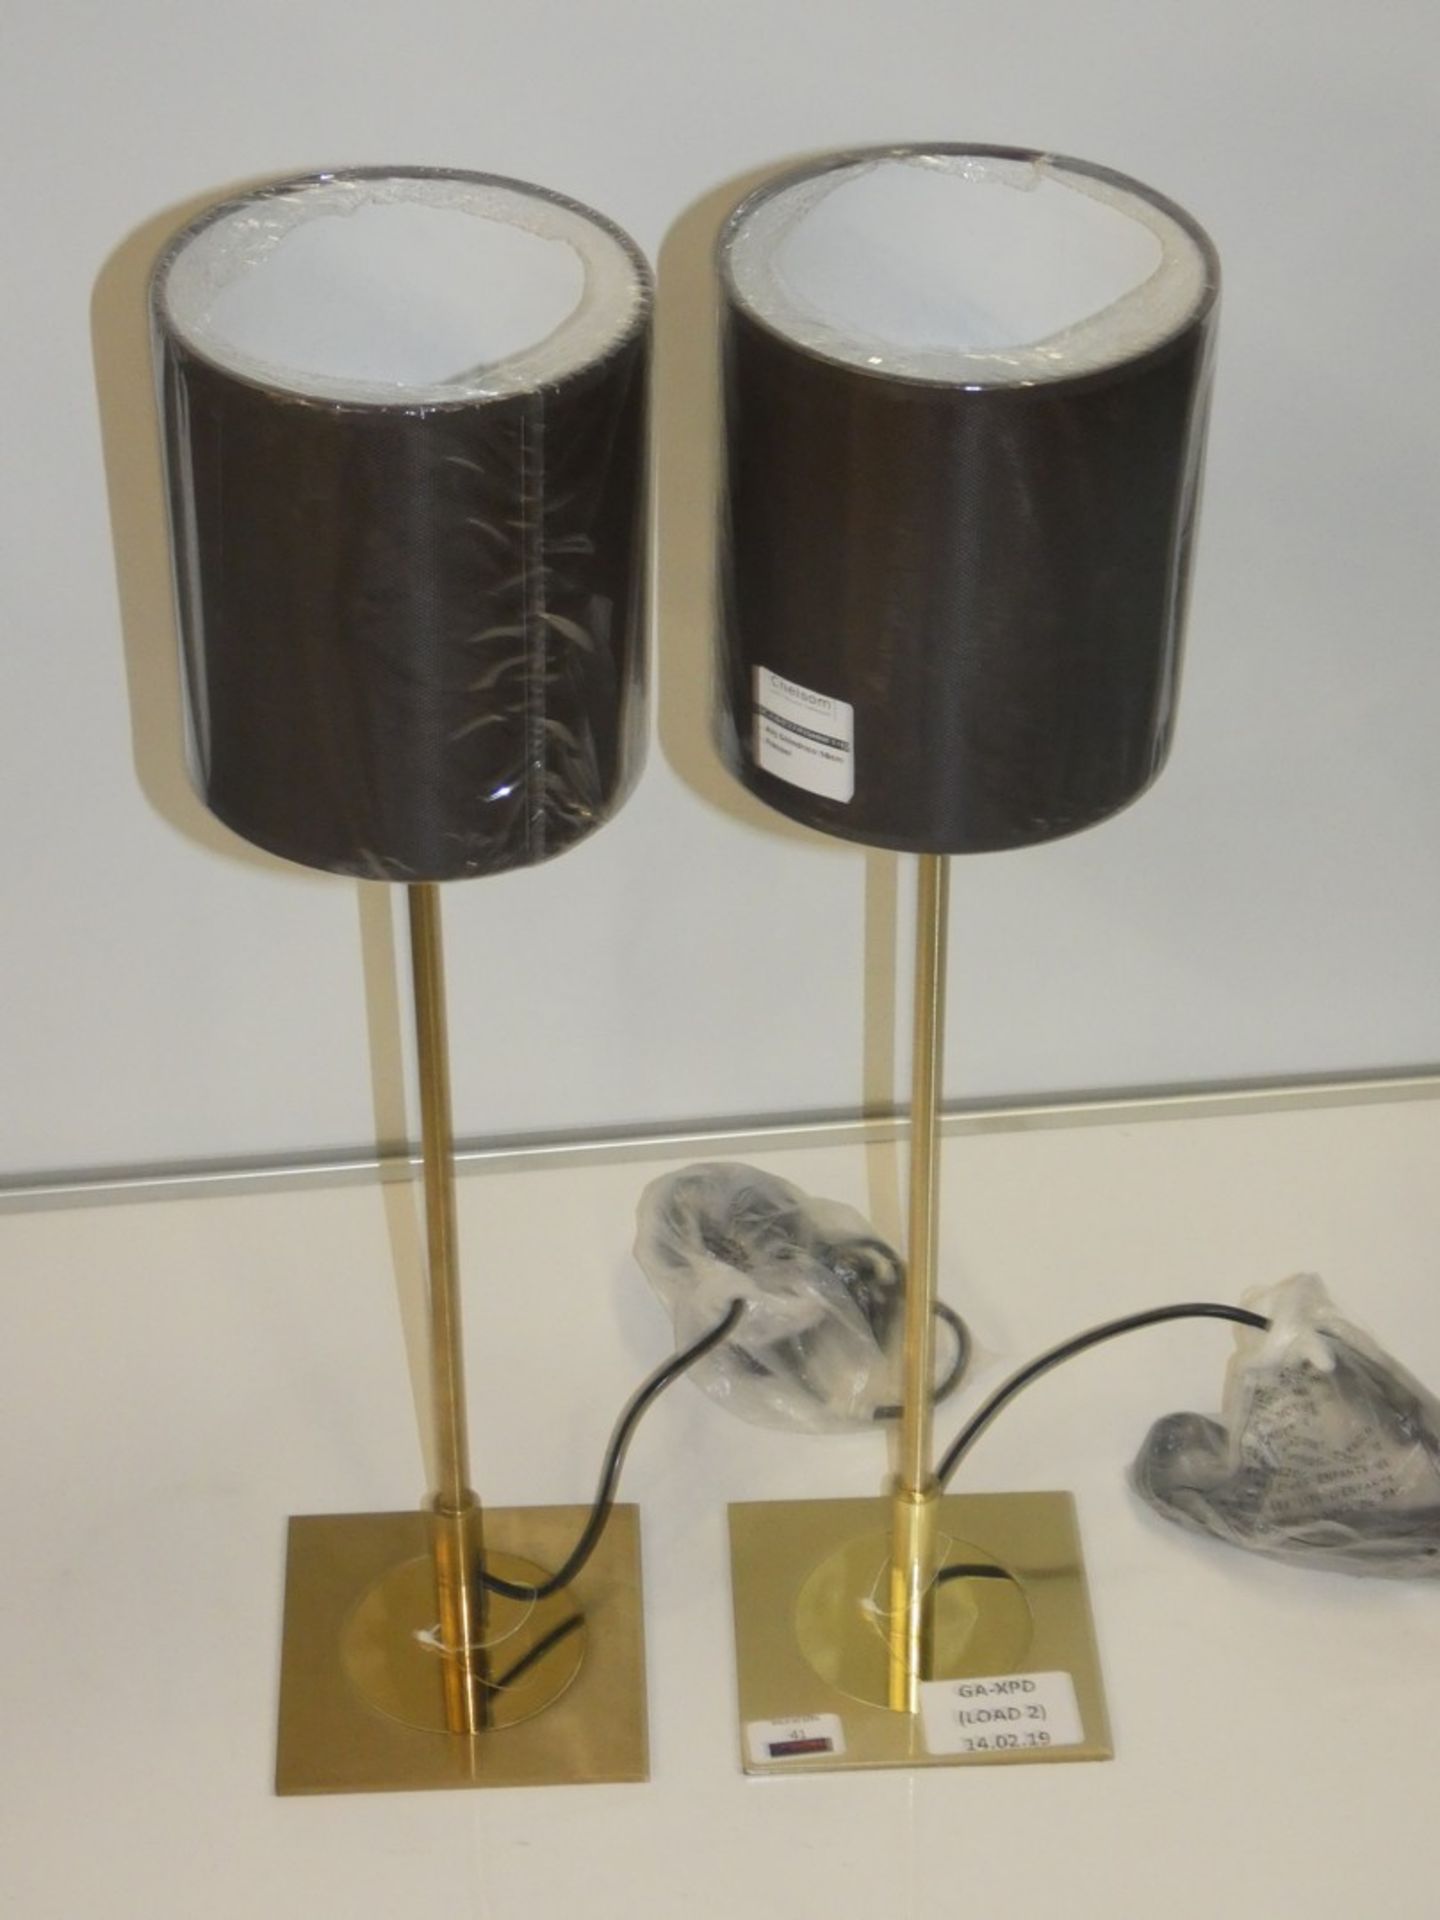 Pair Of Gold Designer Table Lamps With Fishnet Shades From A High-End Lighting Company (Chelsom)